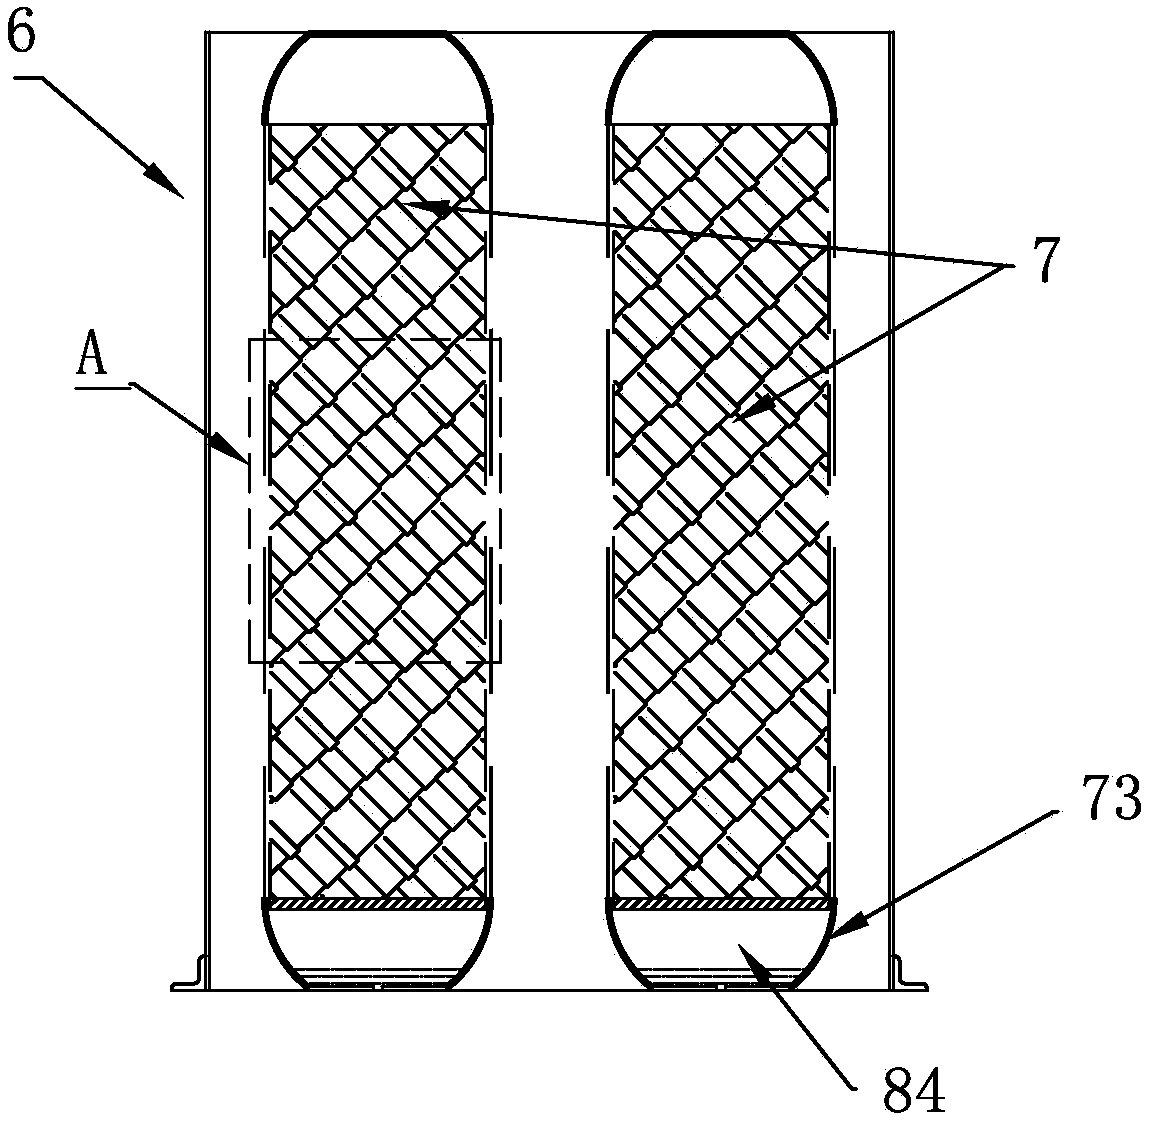 Exhaust noise reduction device capable of effectively reducing oil smoke pollution